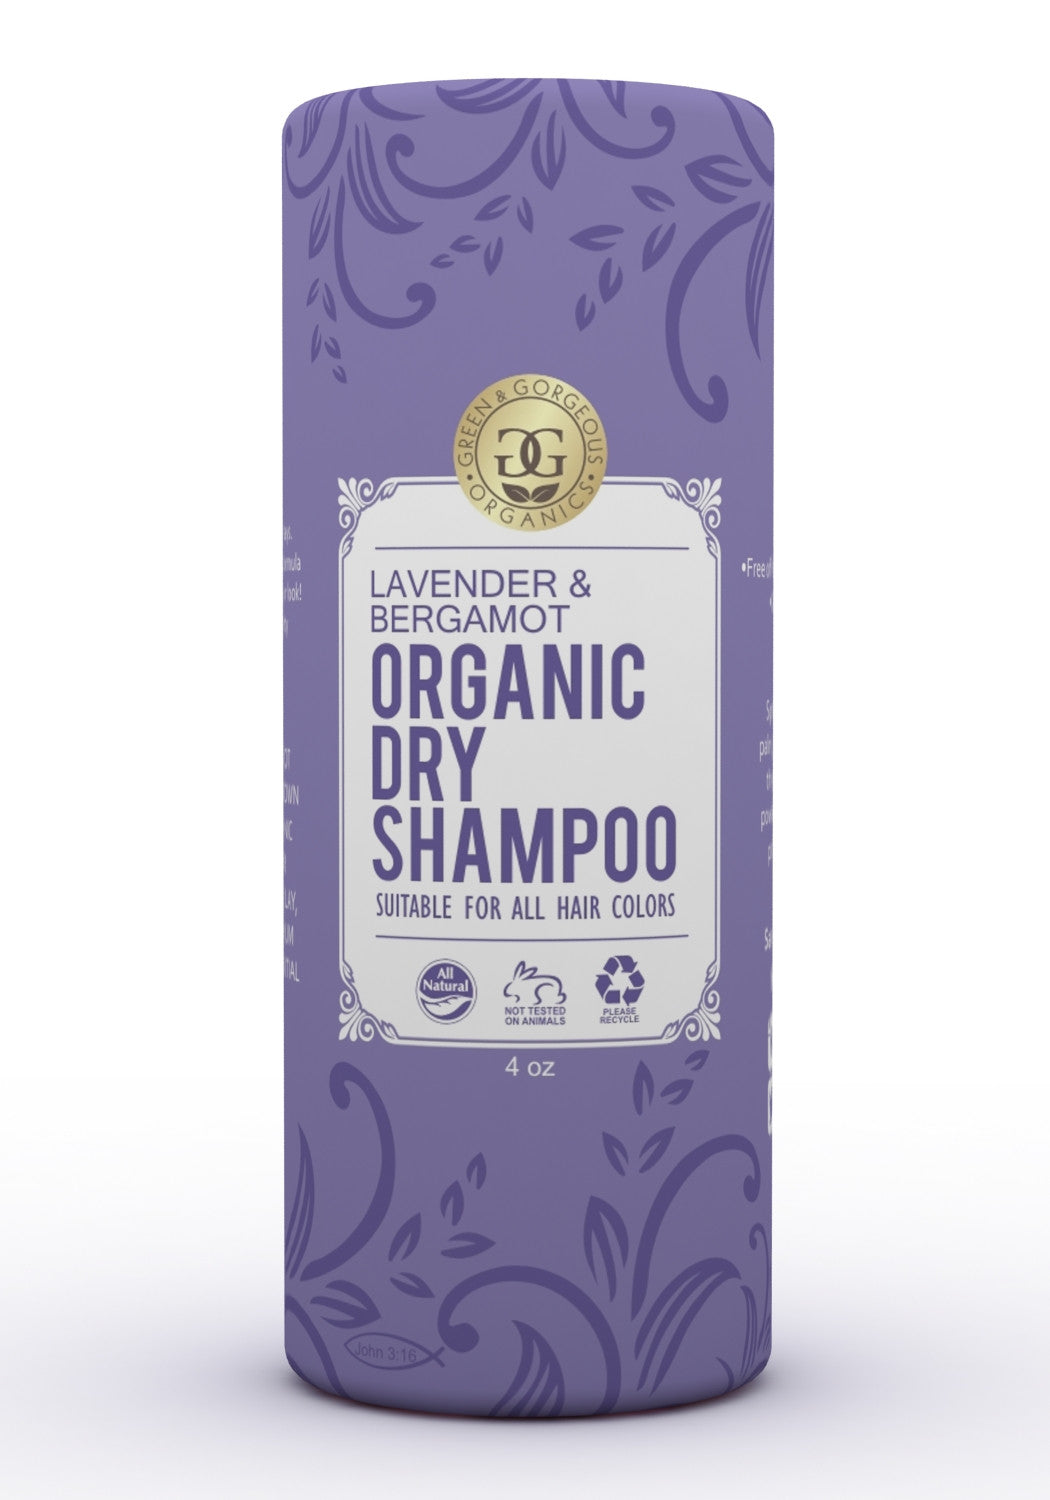 Types Dry Oily – Green LLC Organics, Shampoo and Natural Powder All Laven Hair - for Gorgeous & Organic